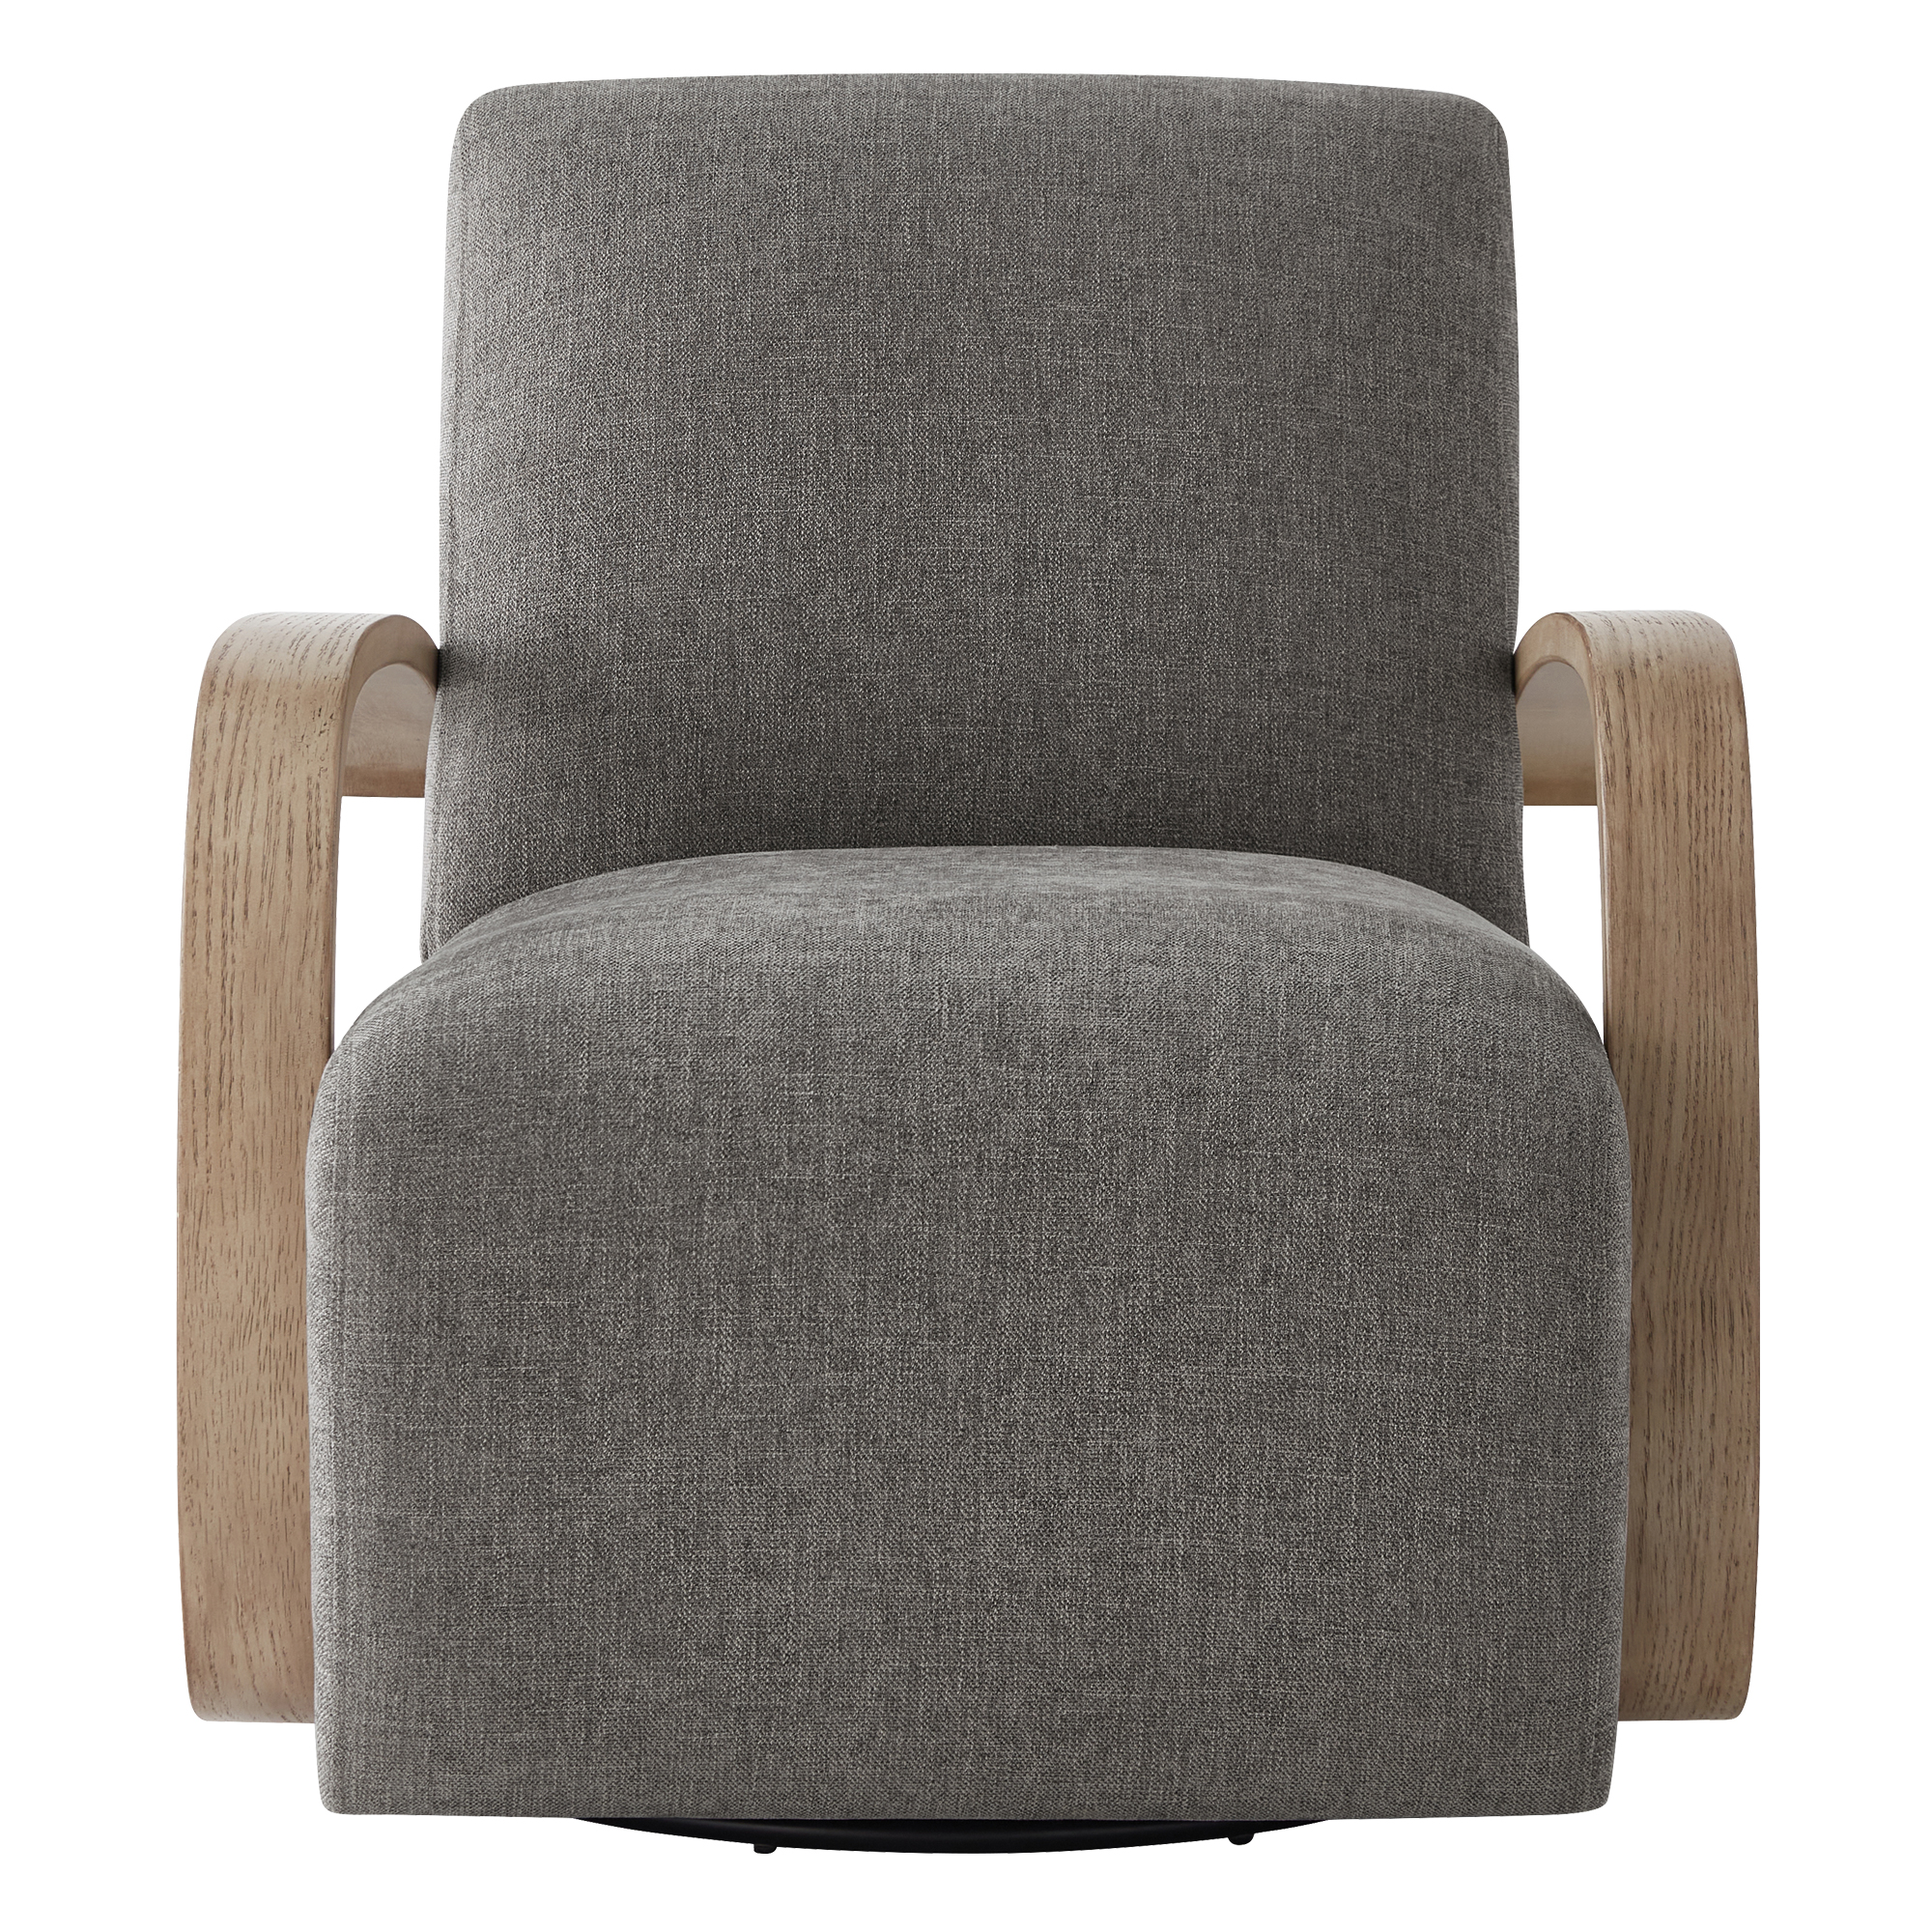 CHITA Swivel Accent Chair with U-shaped Wood Arm for Living Room Beedroom, Dark Gray & Gray Wood - image 4 of 8